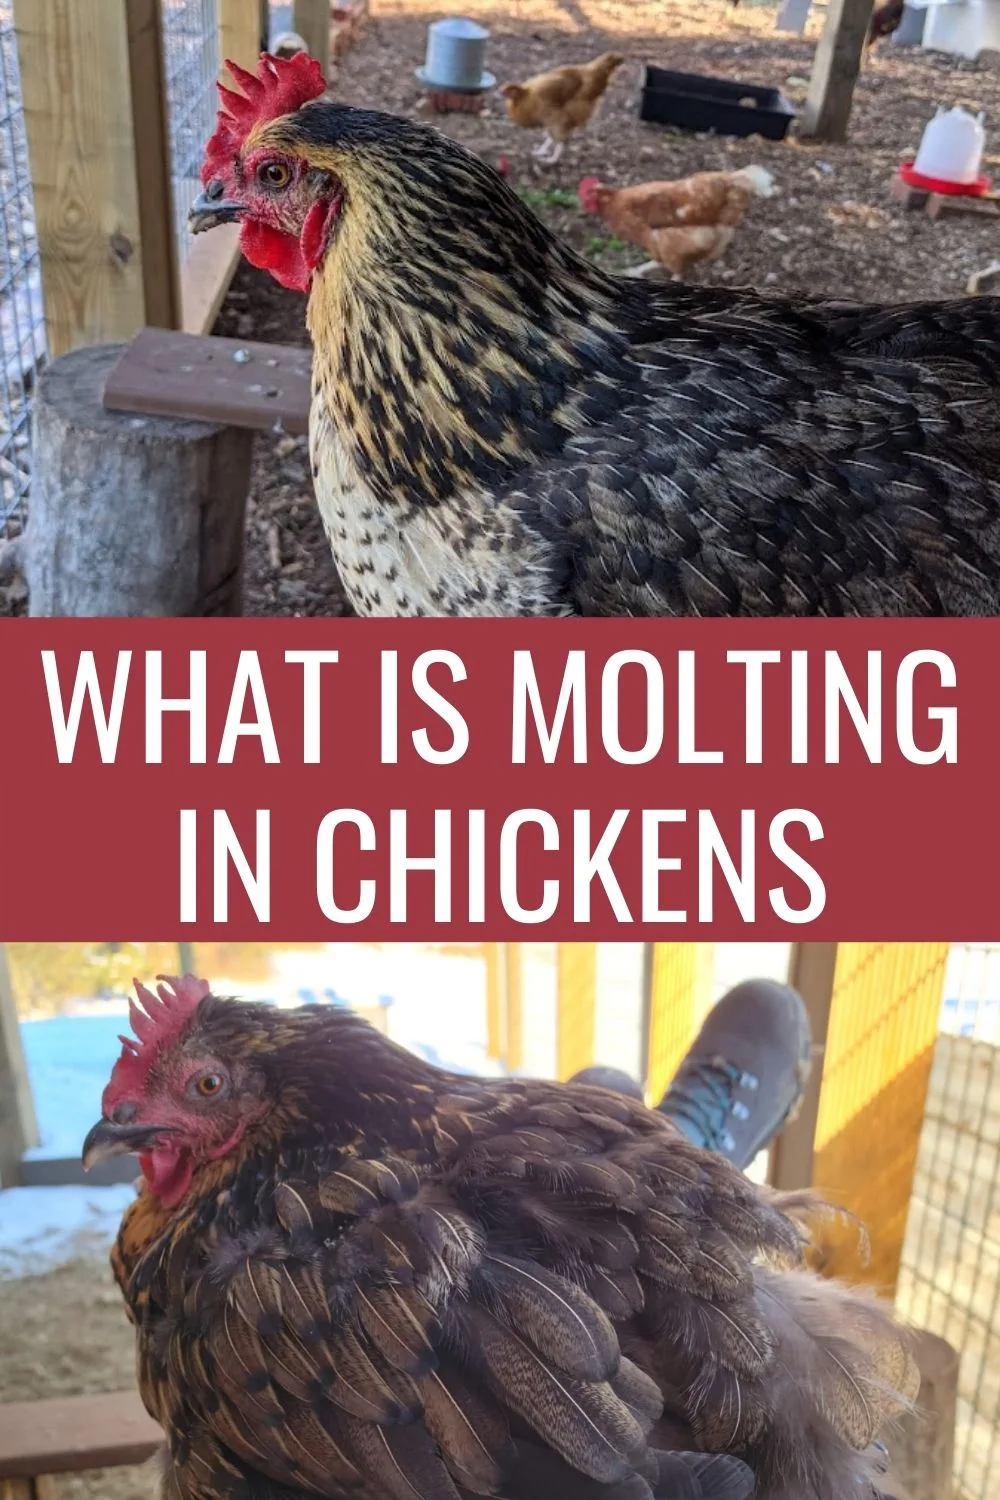 What is molting in chickens